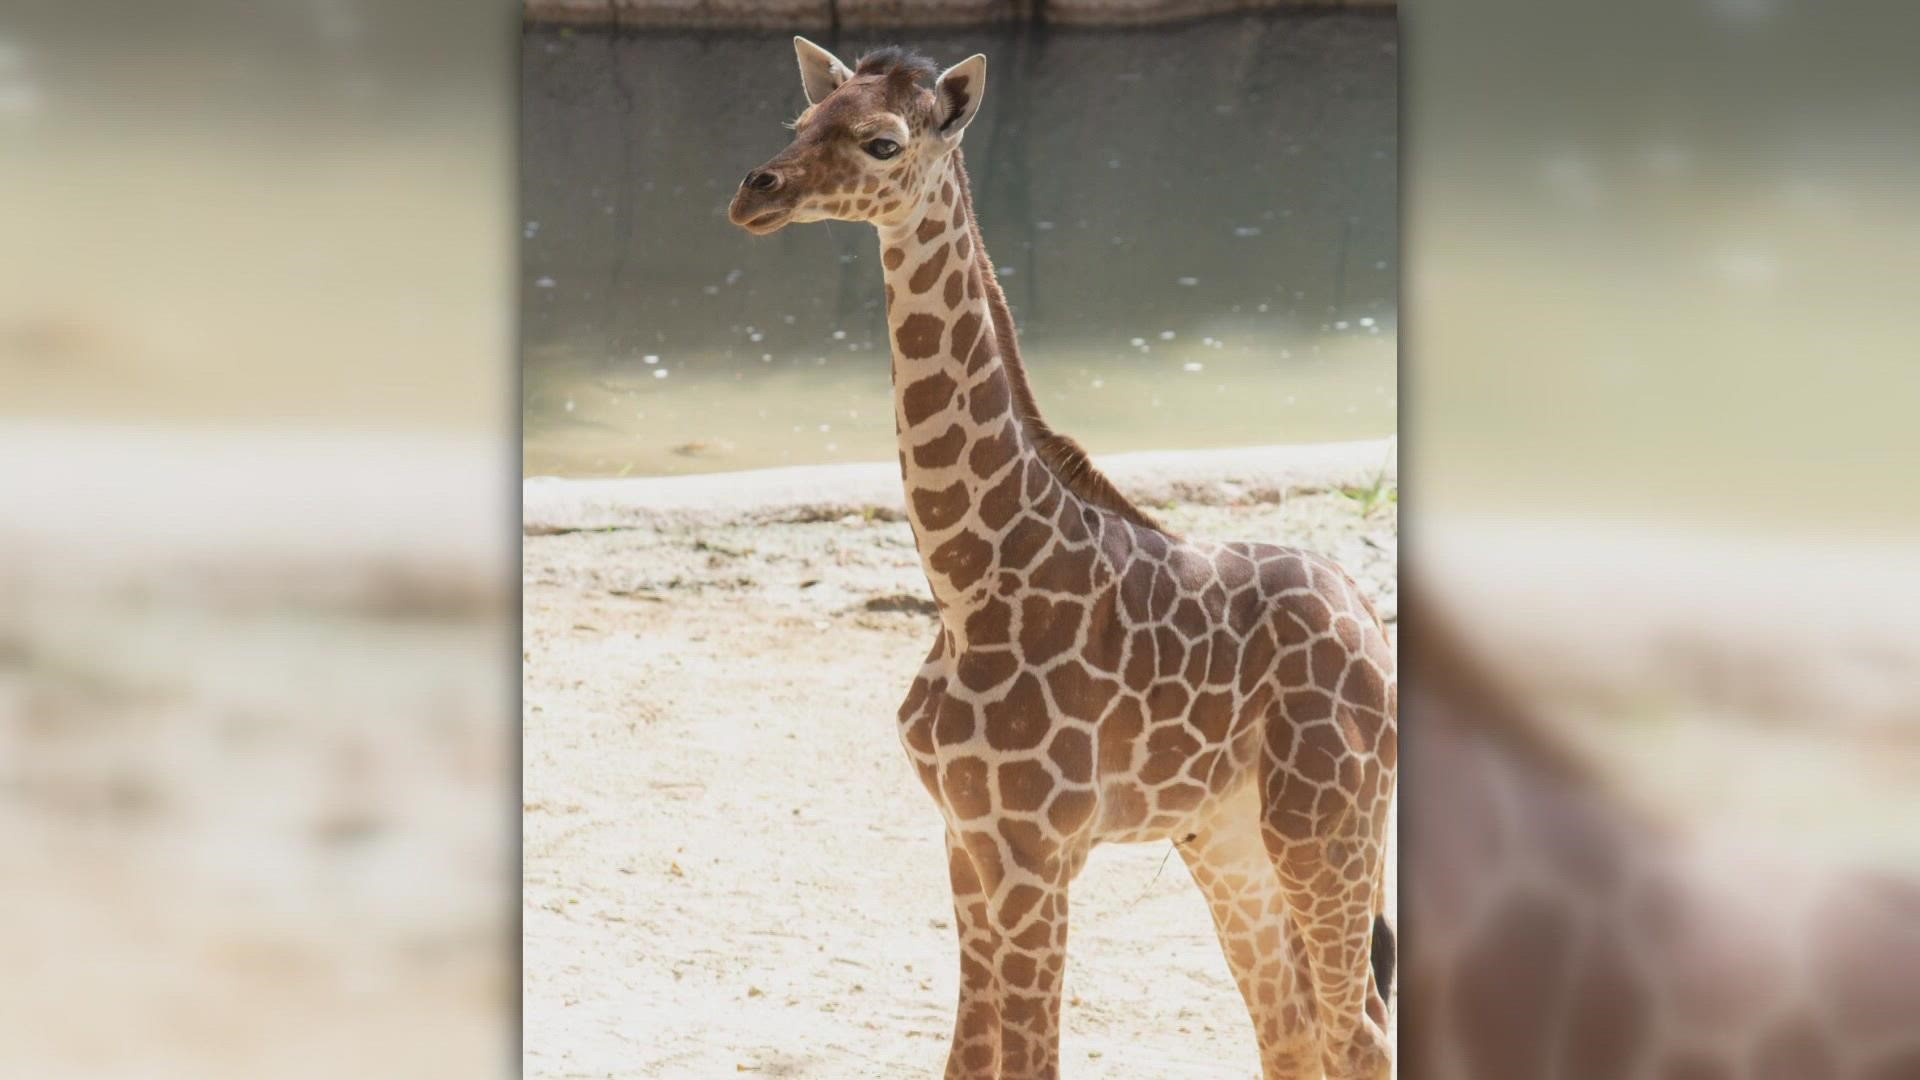 This is the third calf the zoo has suddenly lost since 2015.